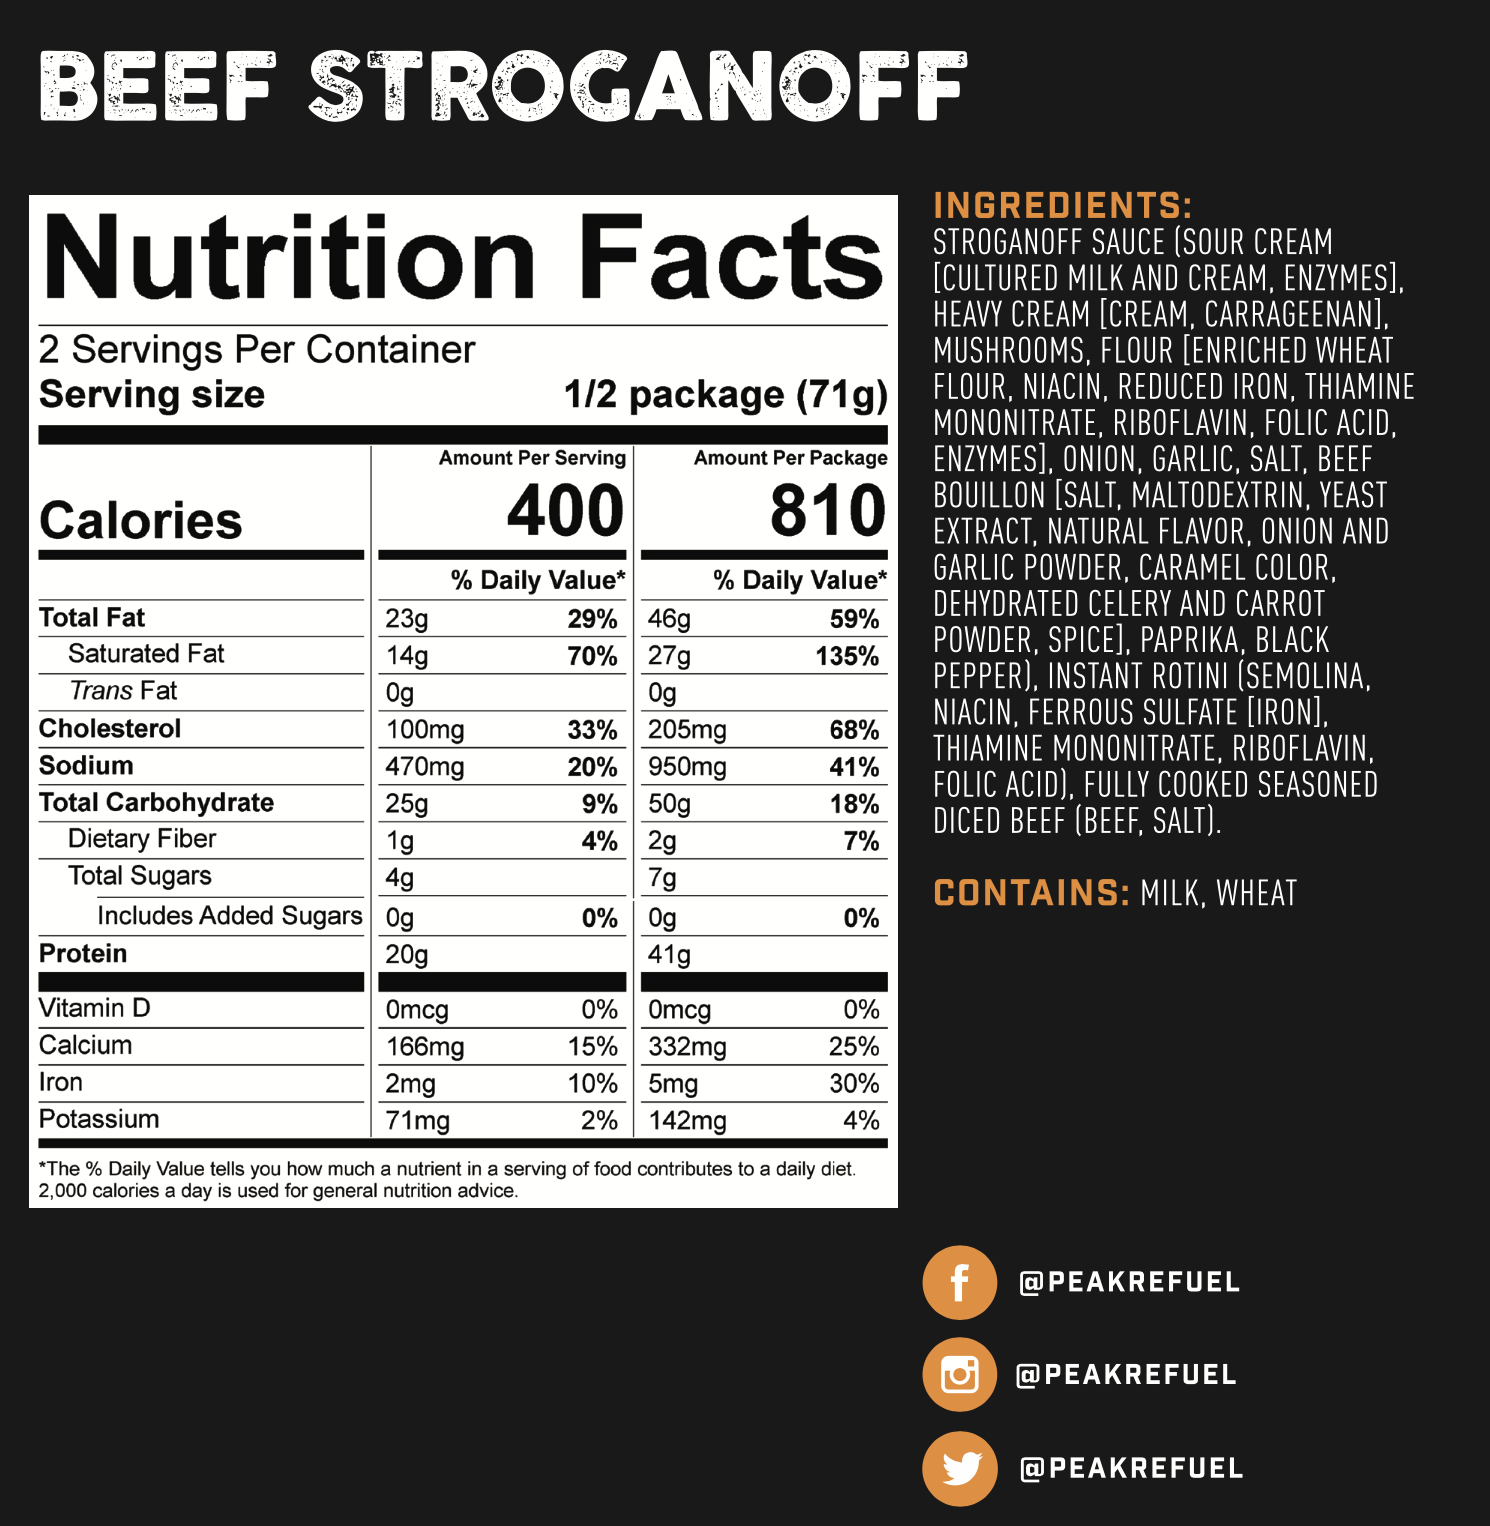 A nutrition facts label with text, a letter "F" in a circle, and a camera logo.